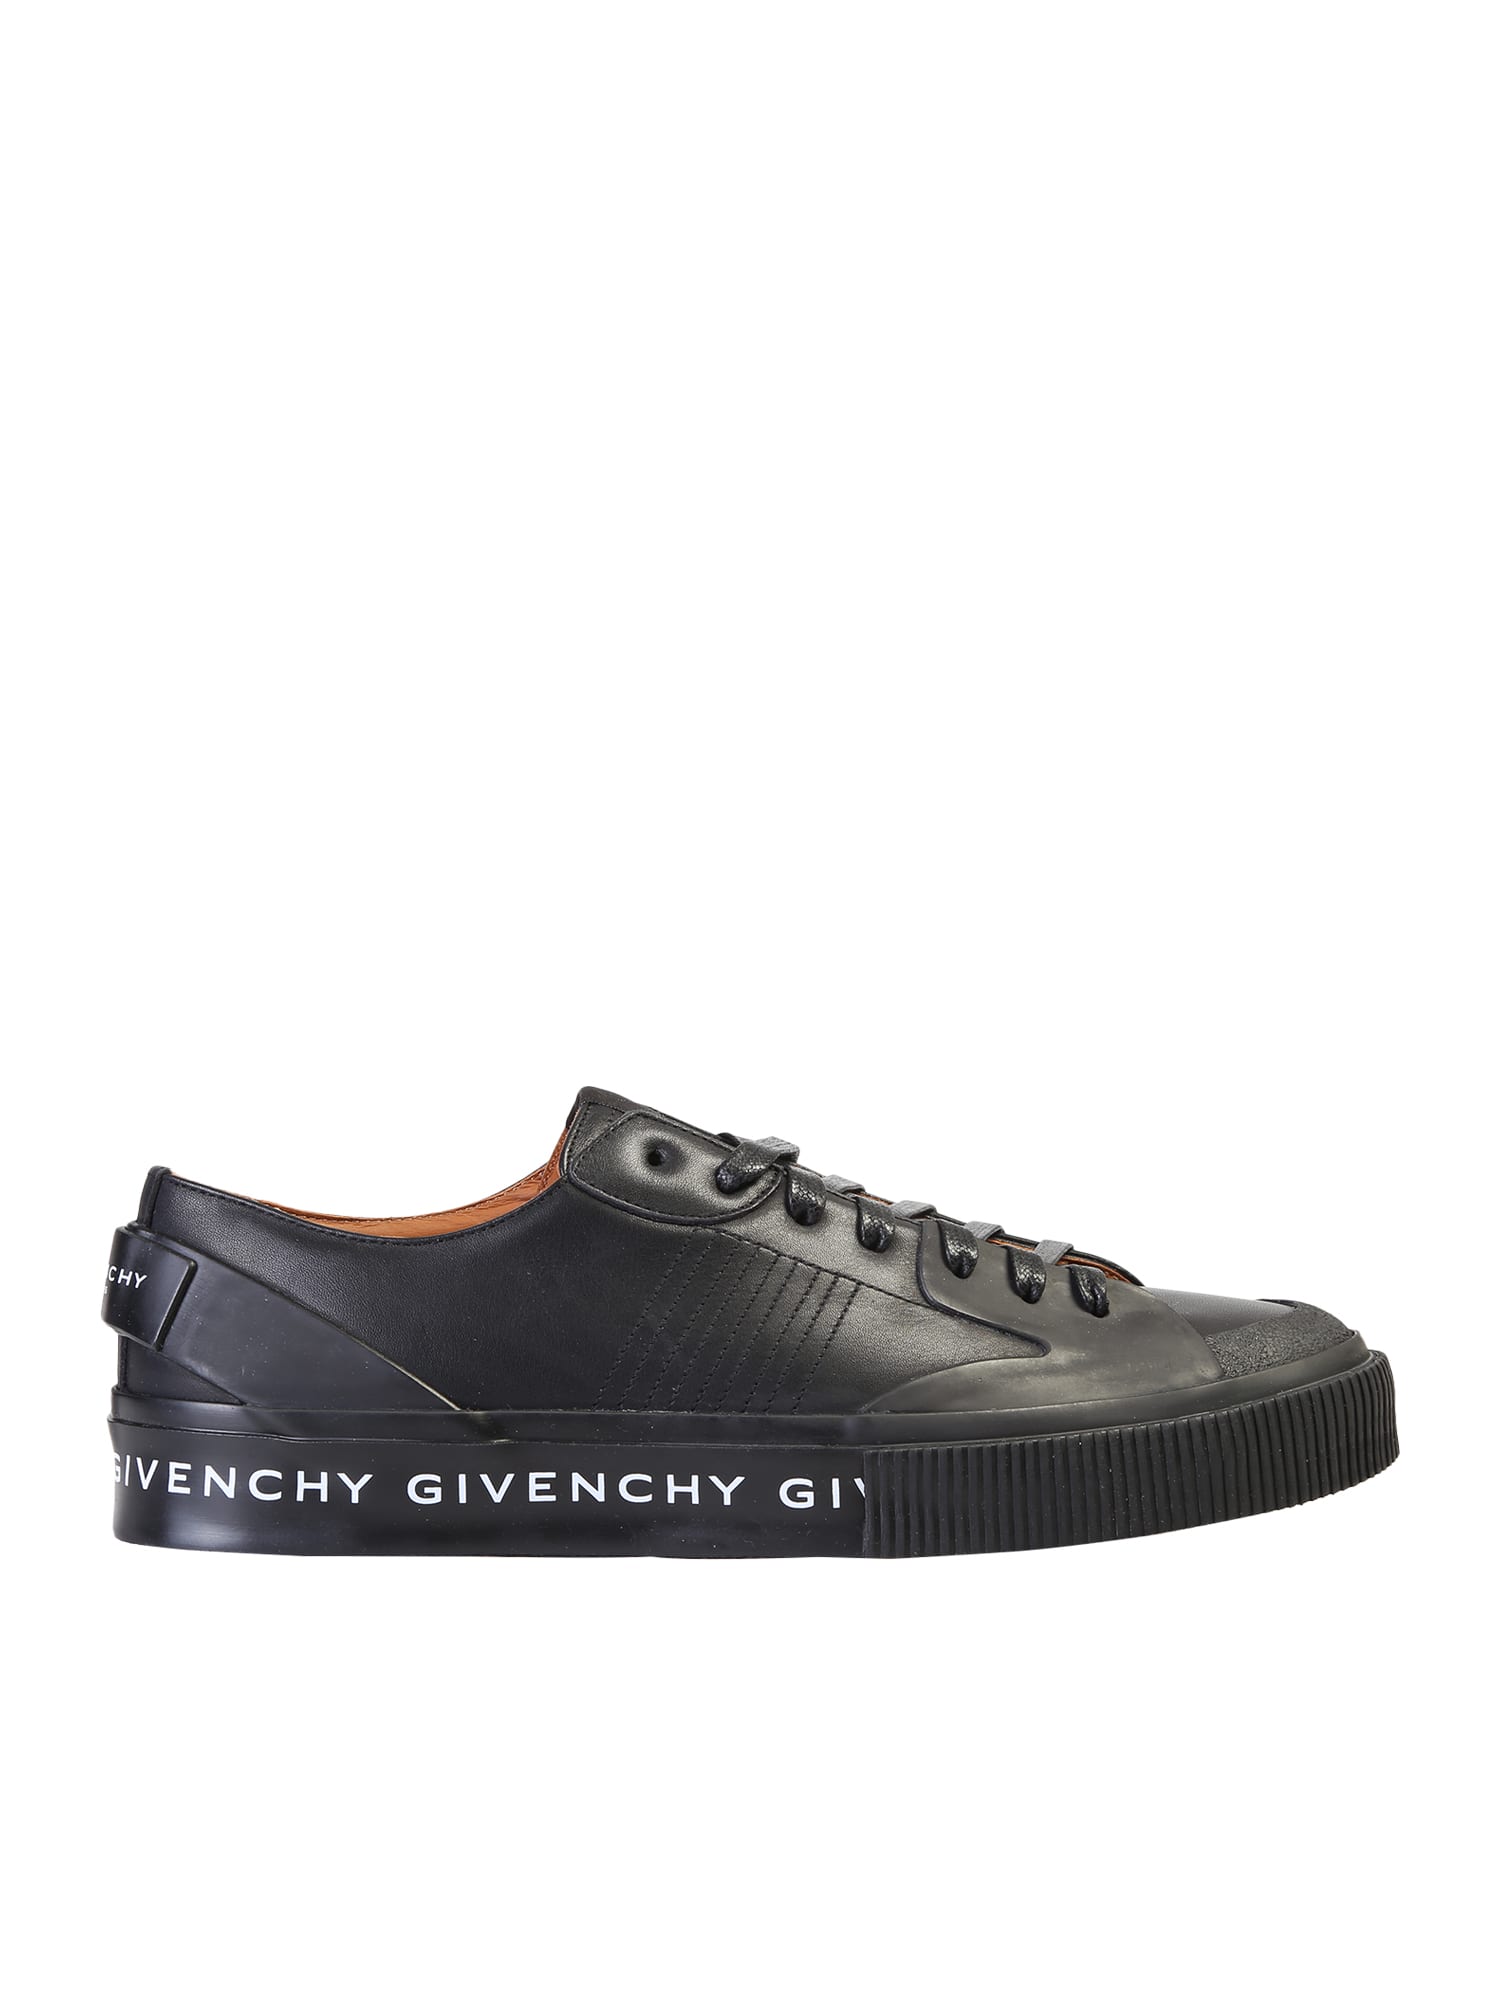 GIVENCHY BRANDED trainers,11188238